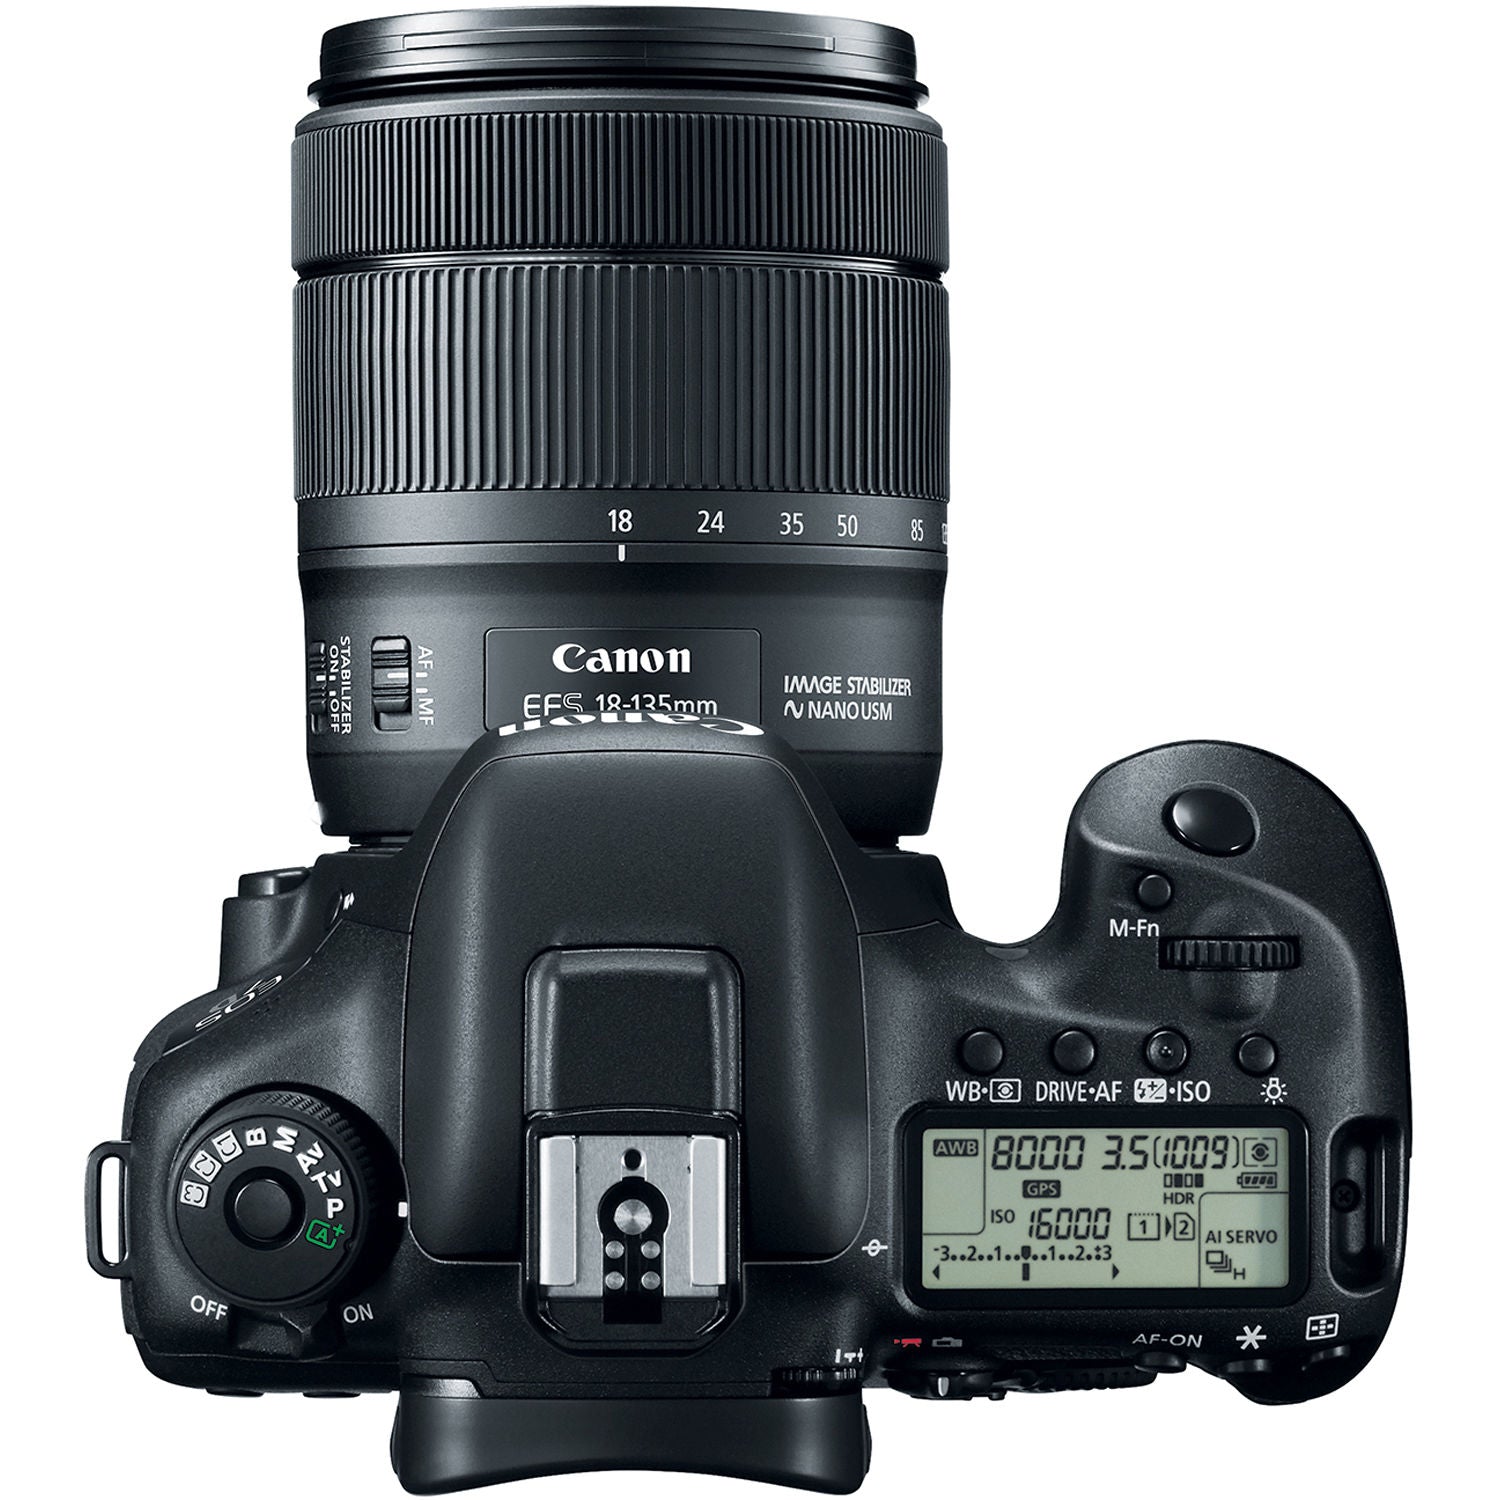 Canon EOS 7D Mark II DSLR Camera (Intl Model) with 18-135mm Lens & W-E1 Wi-Fi Adapter With Memory Card Kit, Filter Kit